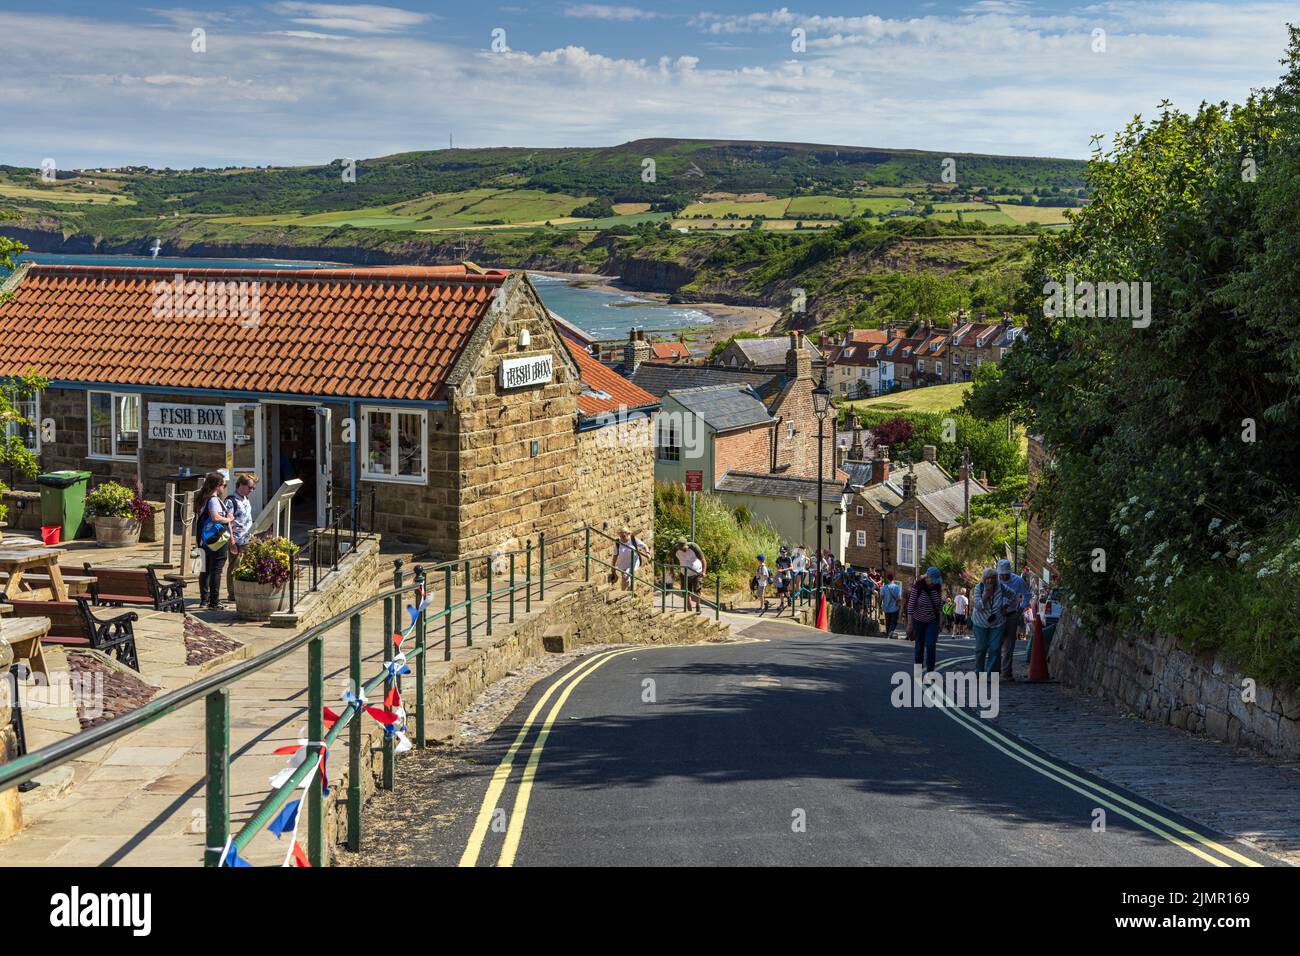 The steep hill leading down to the seafront and beach in the old fishing and smuggling village of Robin Hood's Bay in North Yorkshire, England. Stock Photo